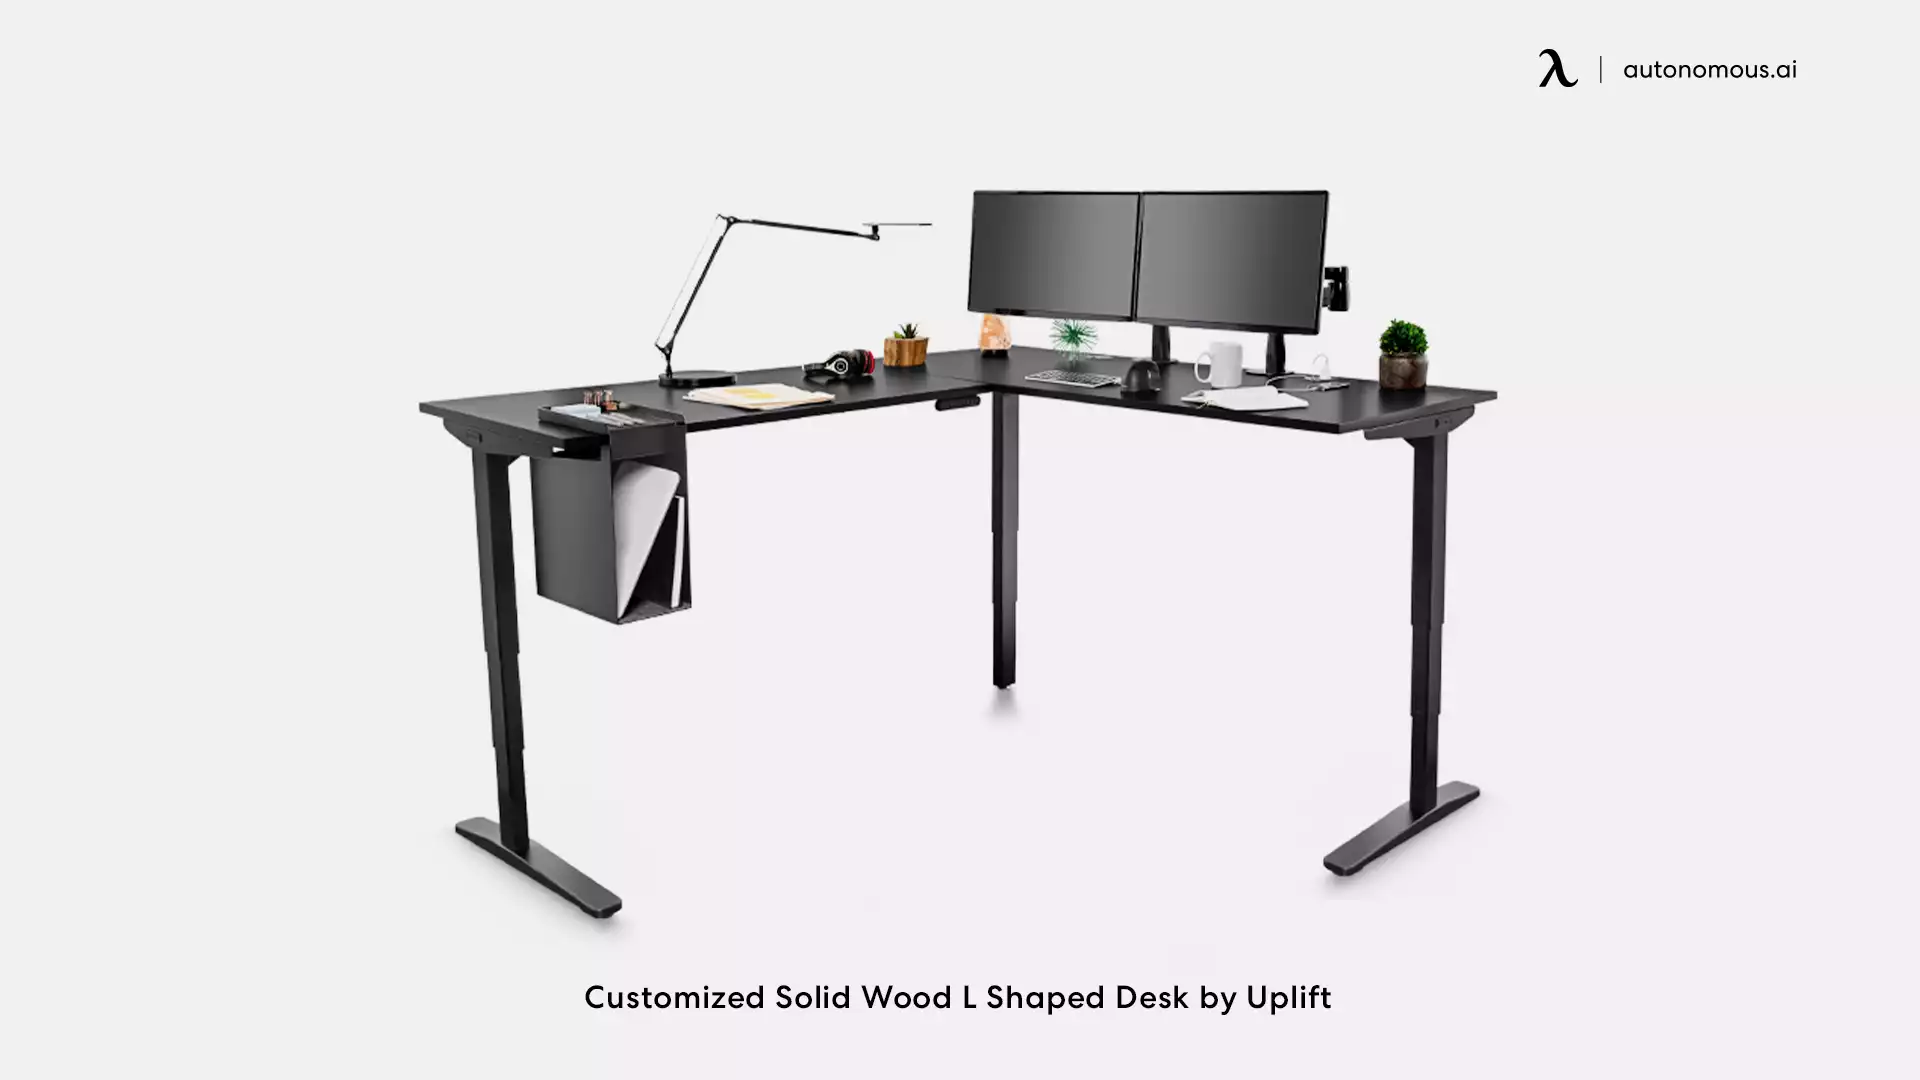 Customized Solid Wood L Shaped Desk by Uplift